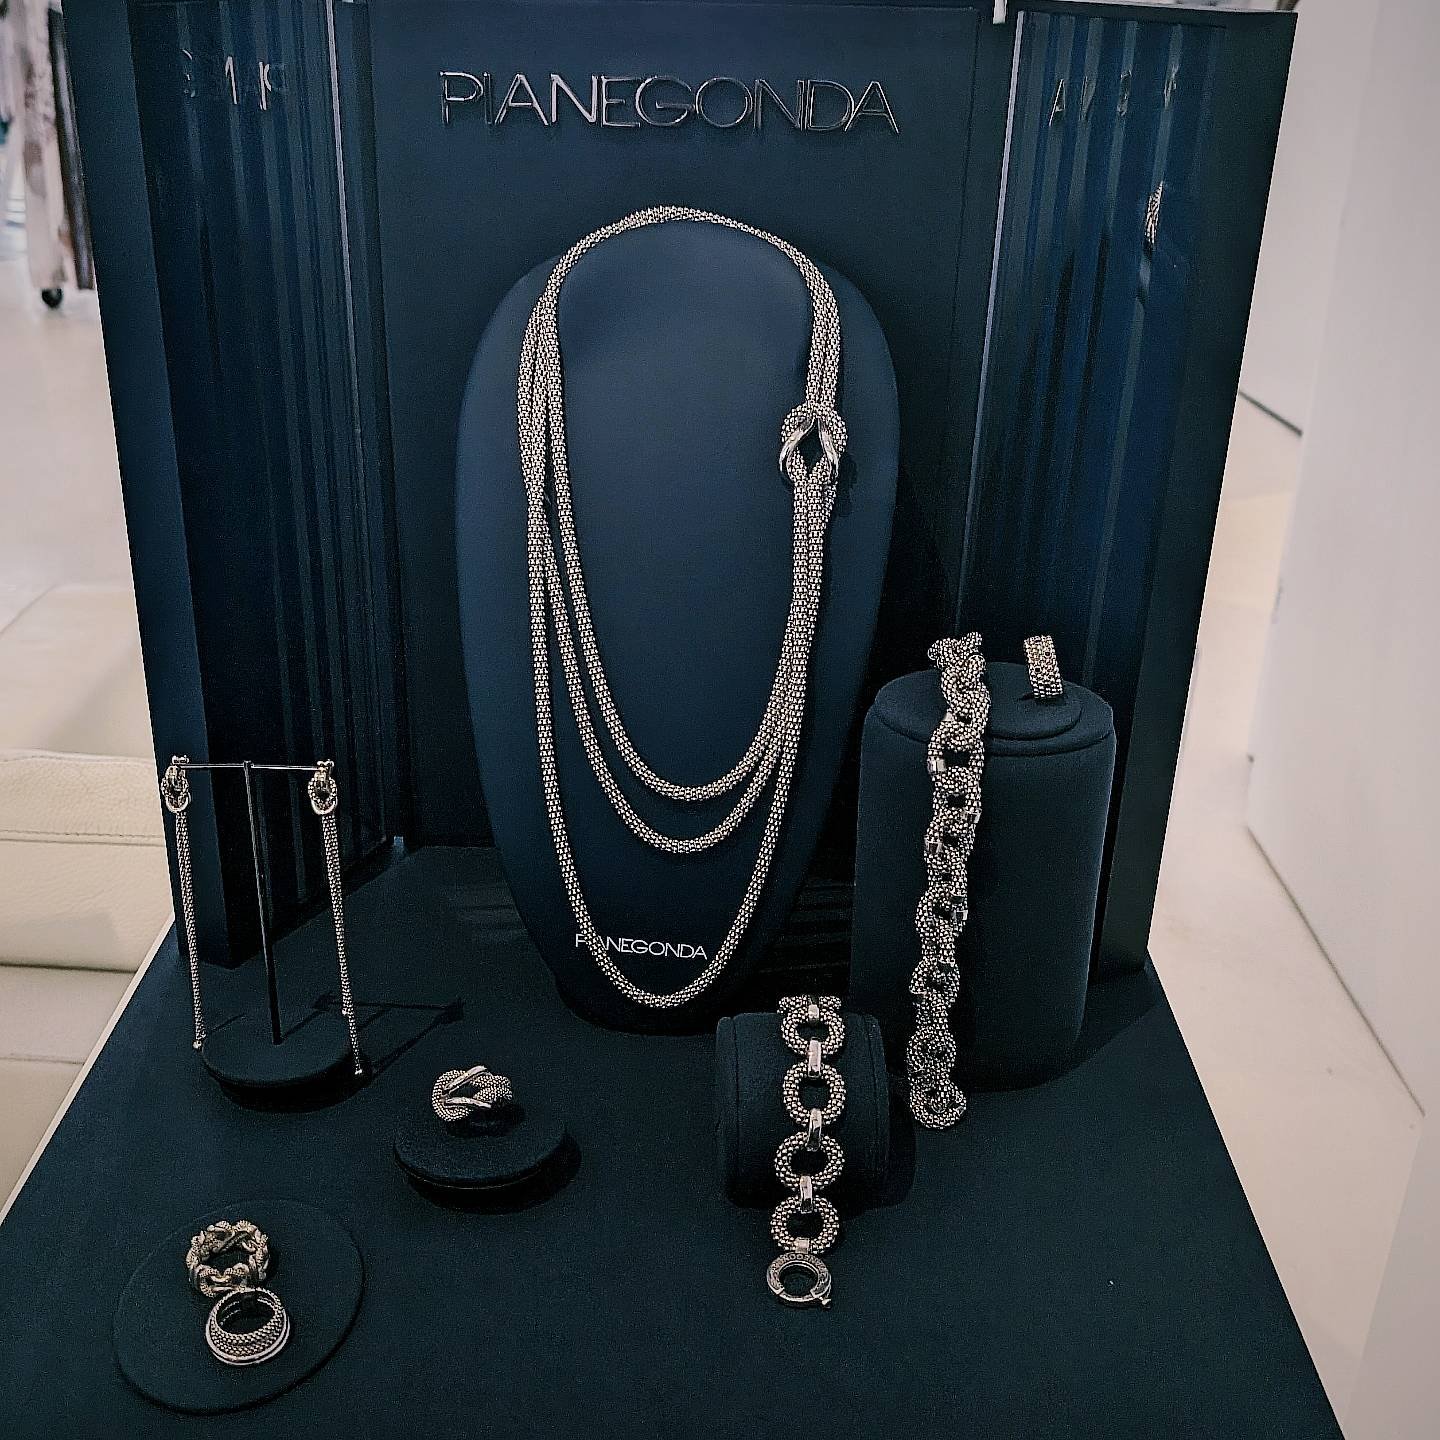 Loved checking out an array of brands at today's @accessoriescouncil event - @pianegonda.jewelry has beautiful visual texture with a great knotted effect #styledirector #creativedirector #teampixel